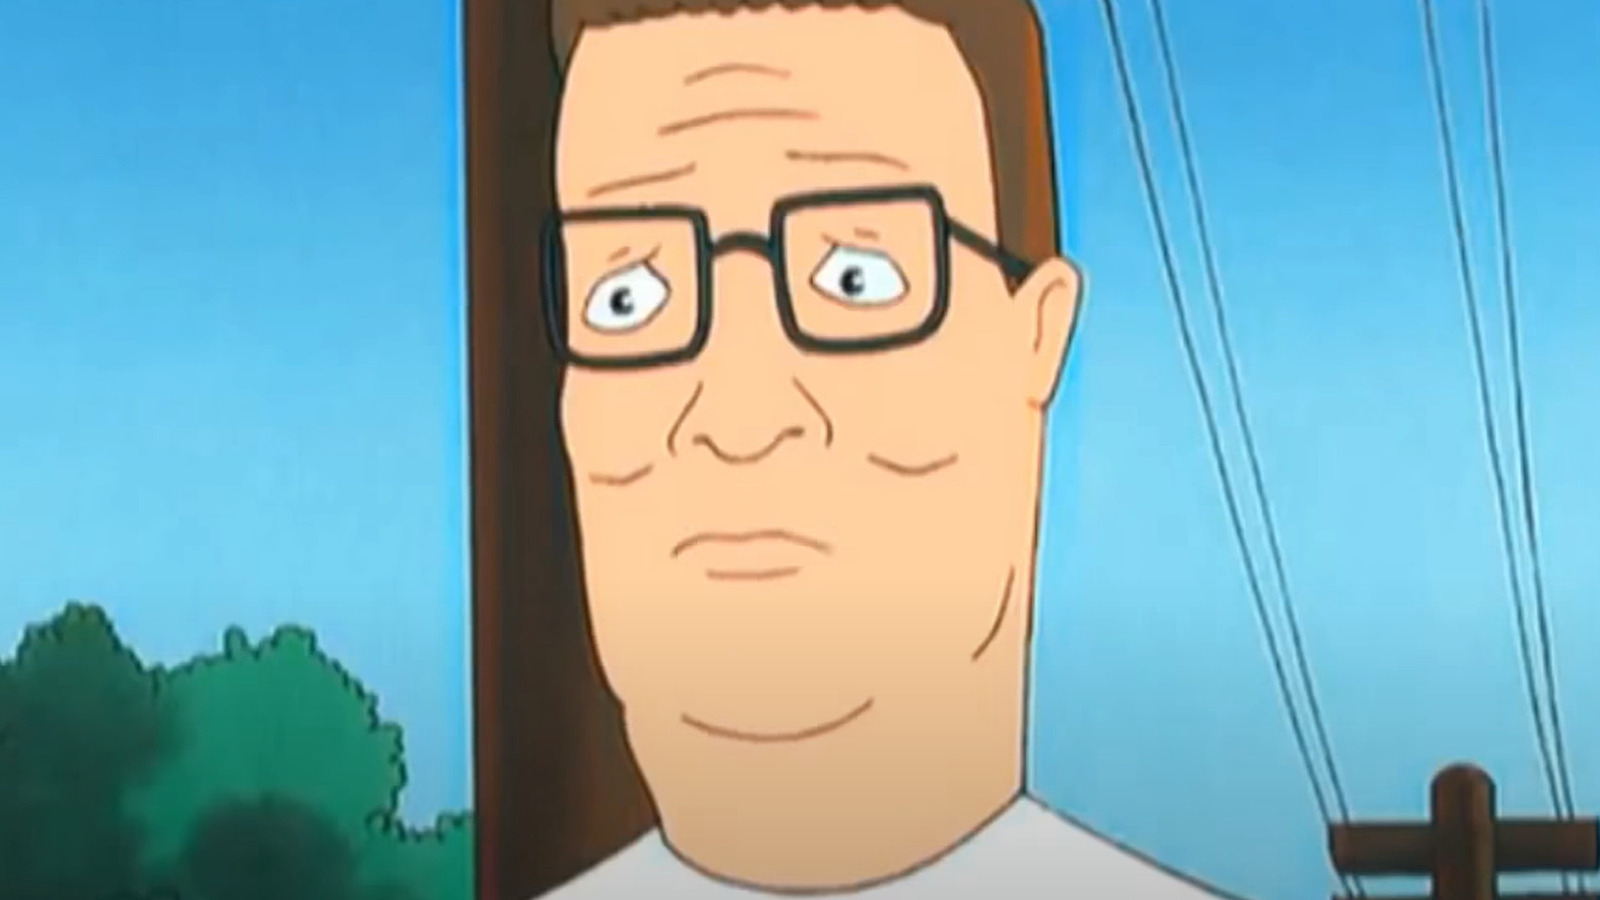 King of the Hill Reboot: Release Date Rumors, Is it a Sequel